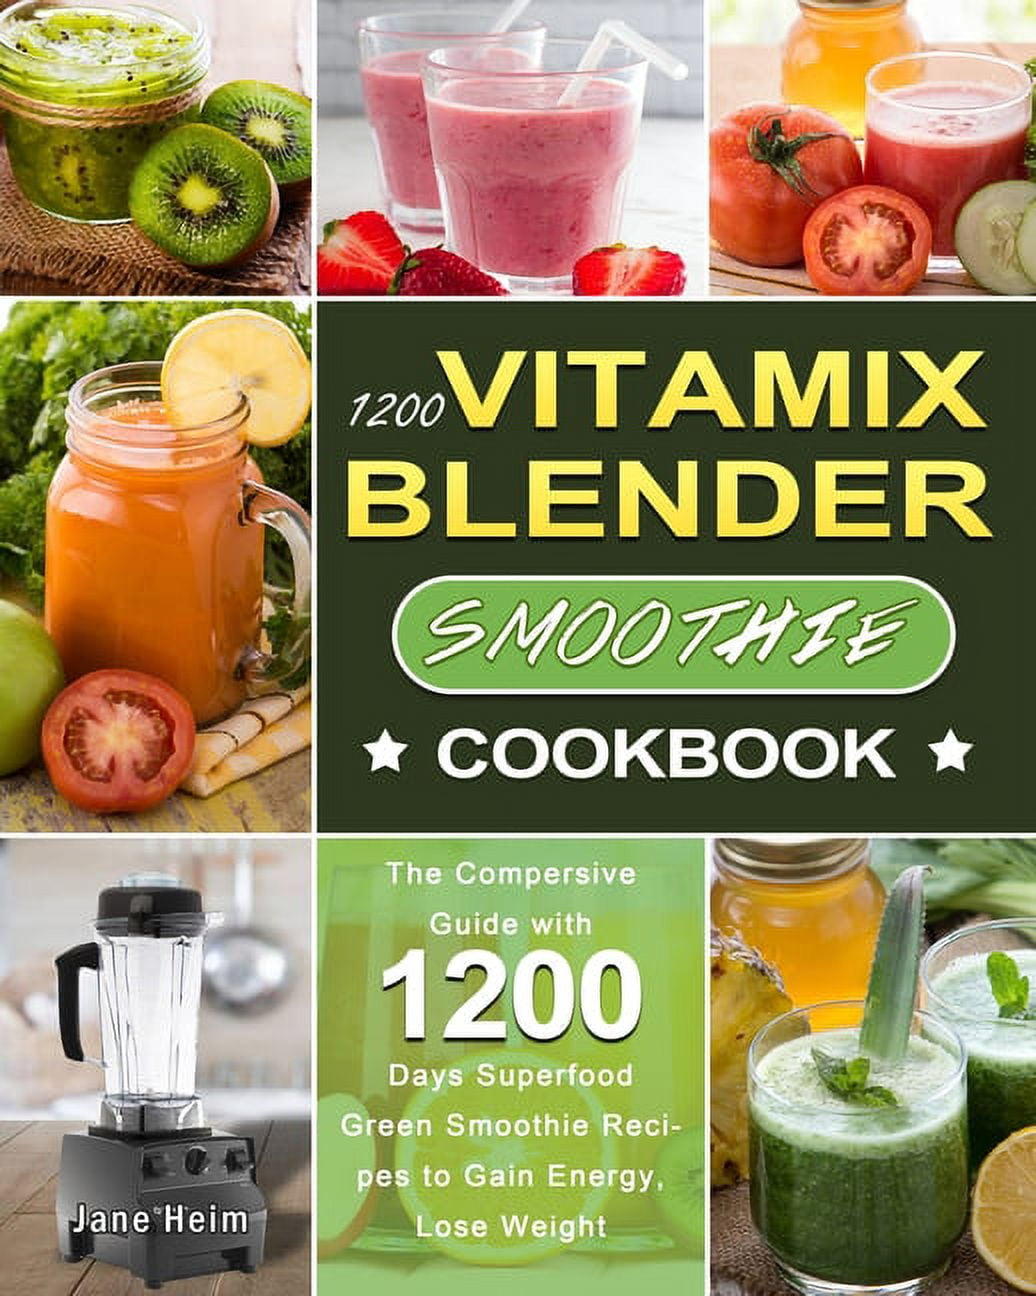 1200 Vitamix Blender Smoothie Cookbook: The Compersive Guide with 1200 Days  Superfood Green Smoothie Recipes to Gain Energy, Lose Weight (Paperback) 